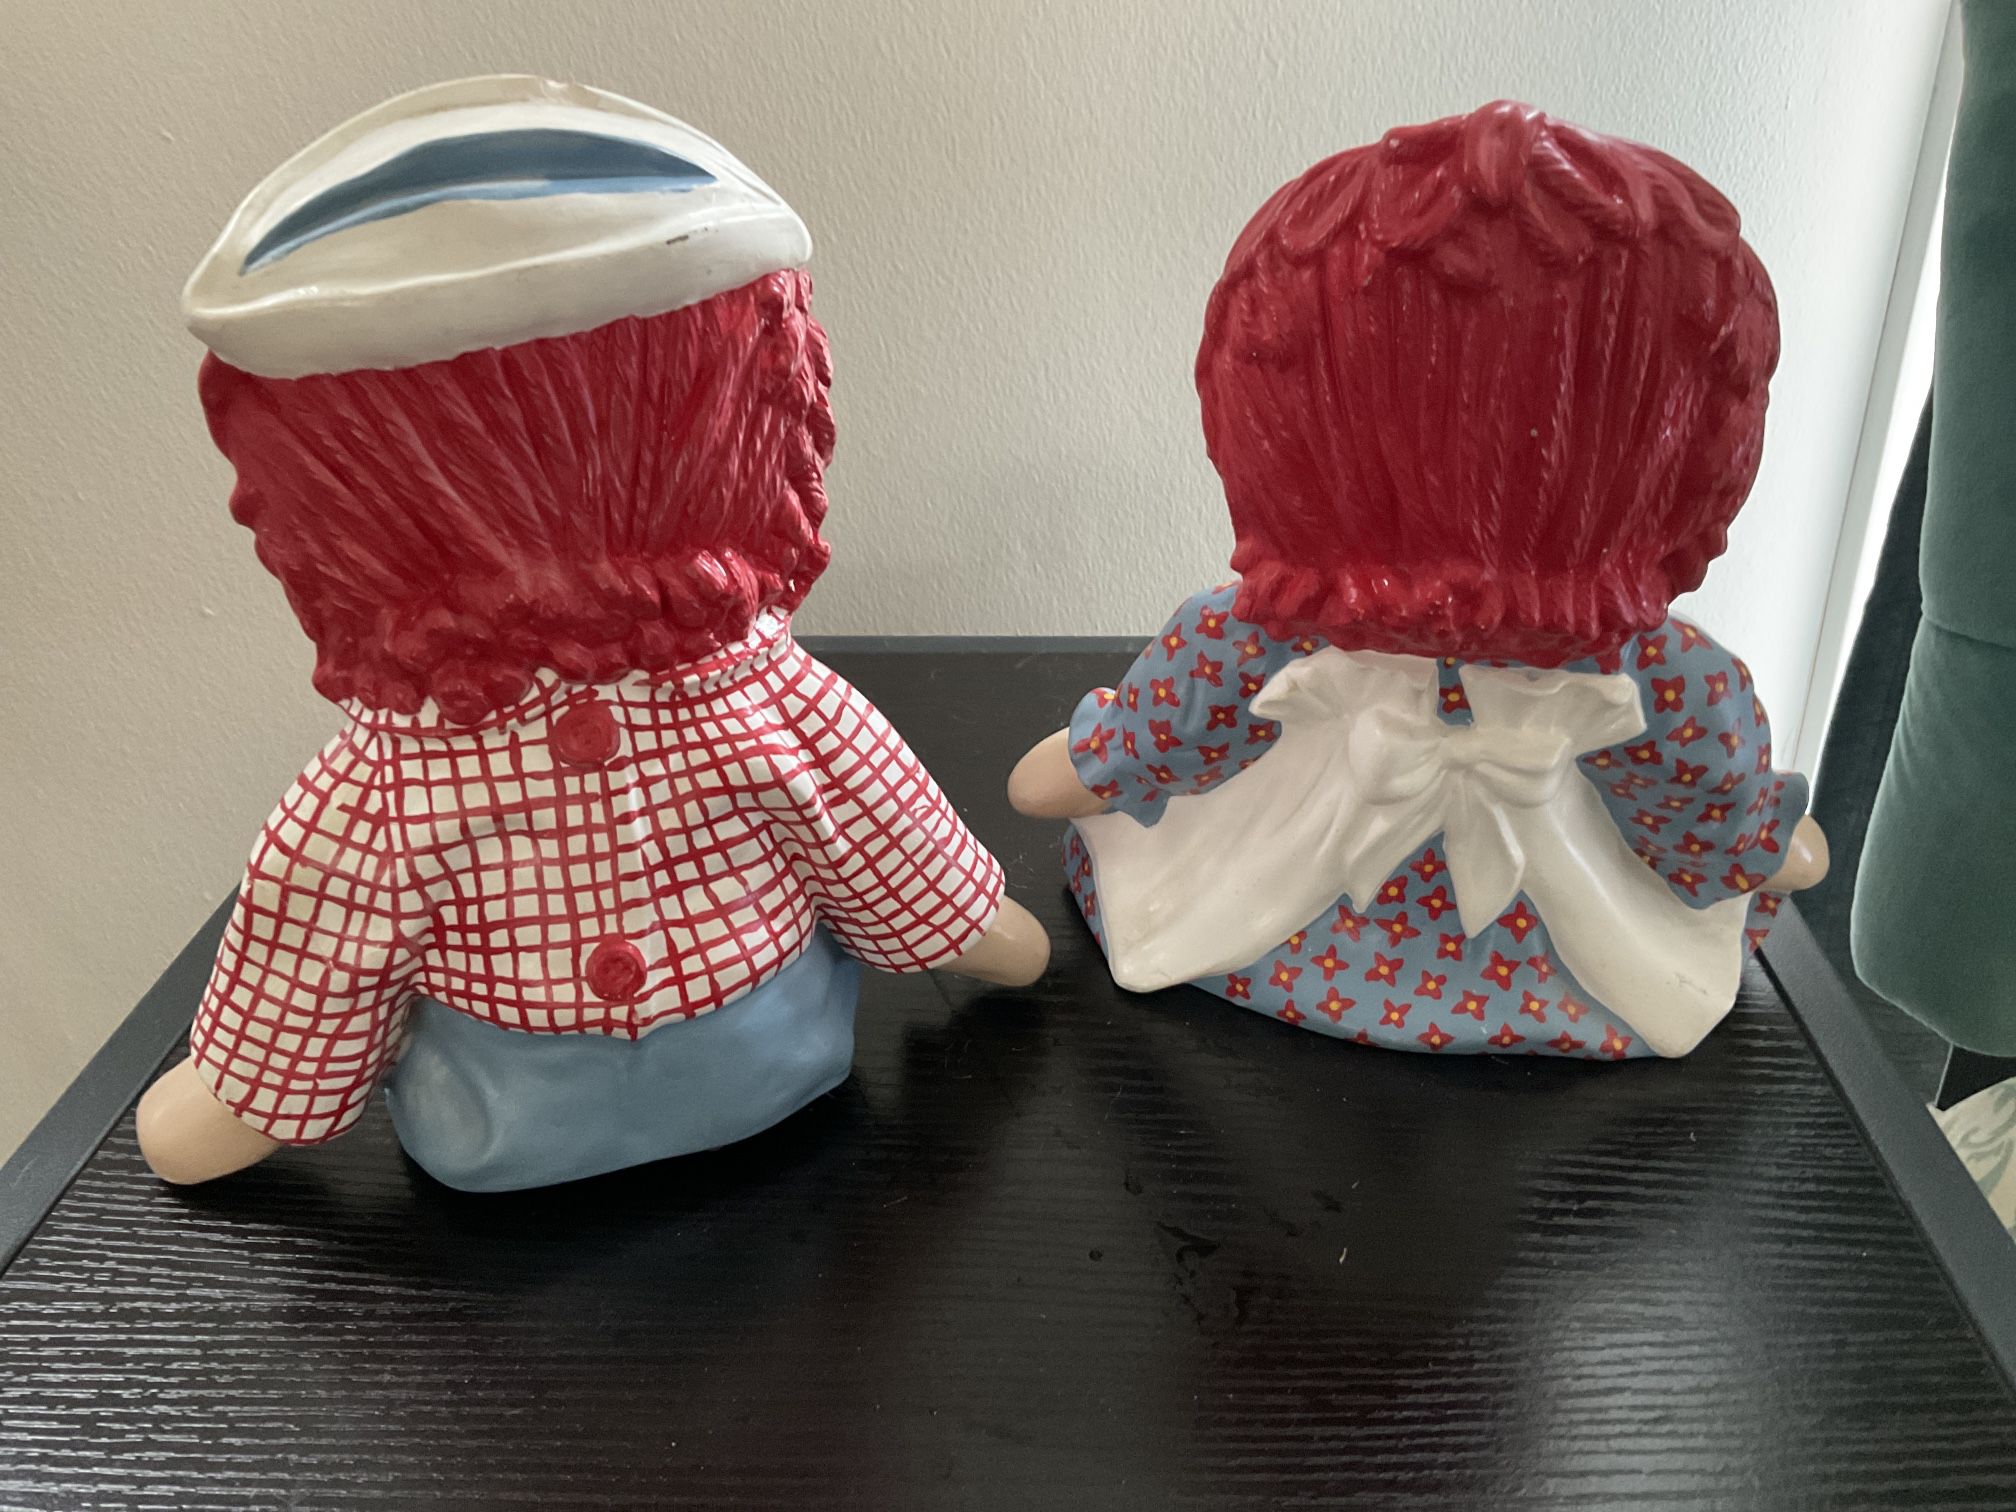 Raggedy Ann & Andy Bookends